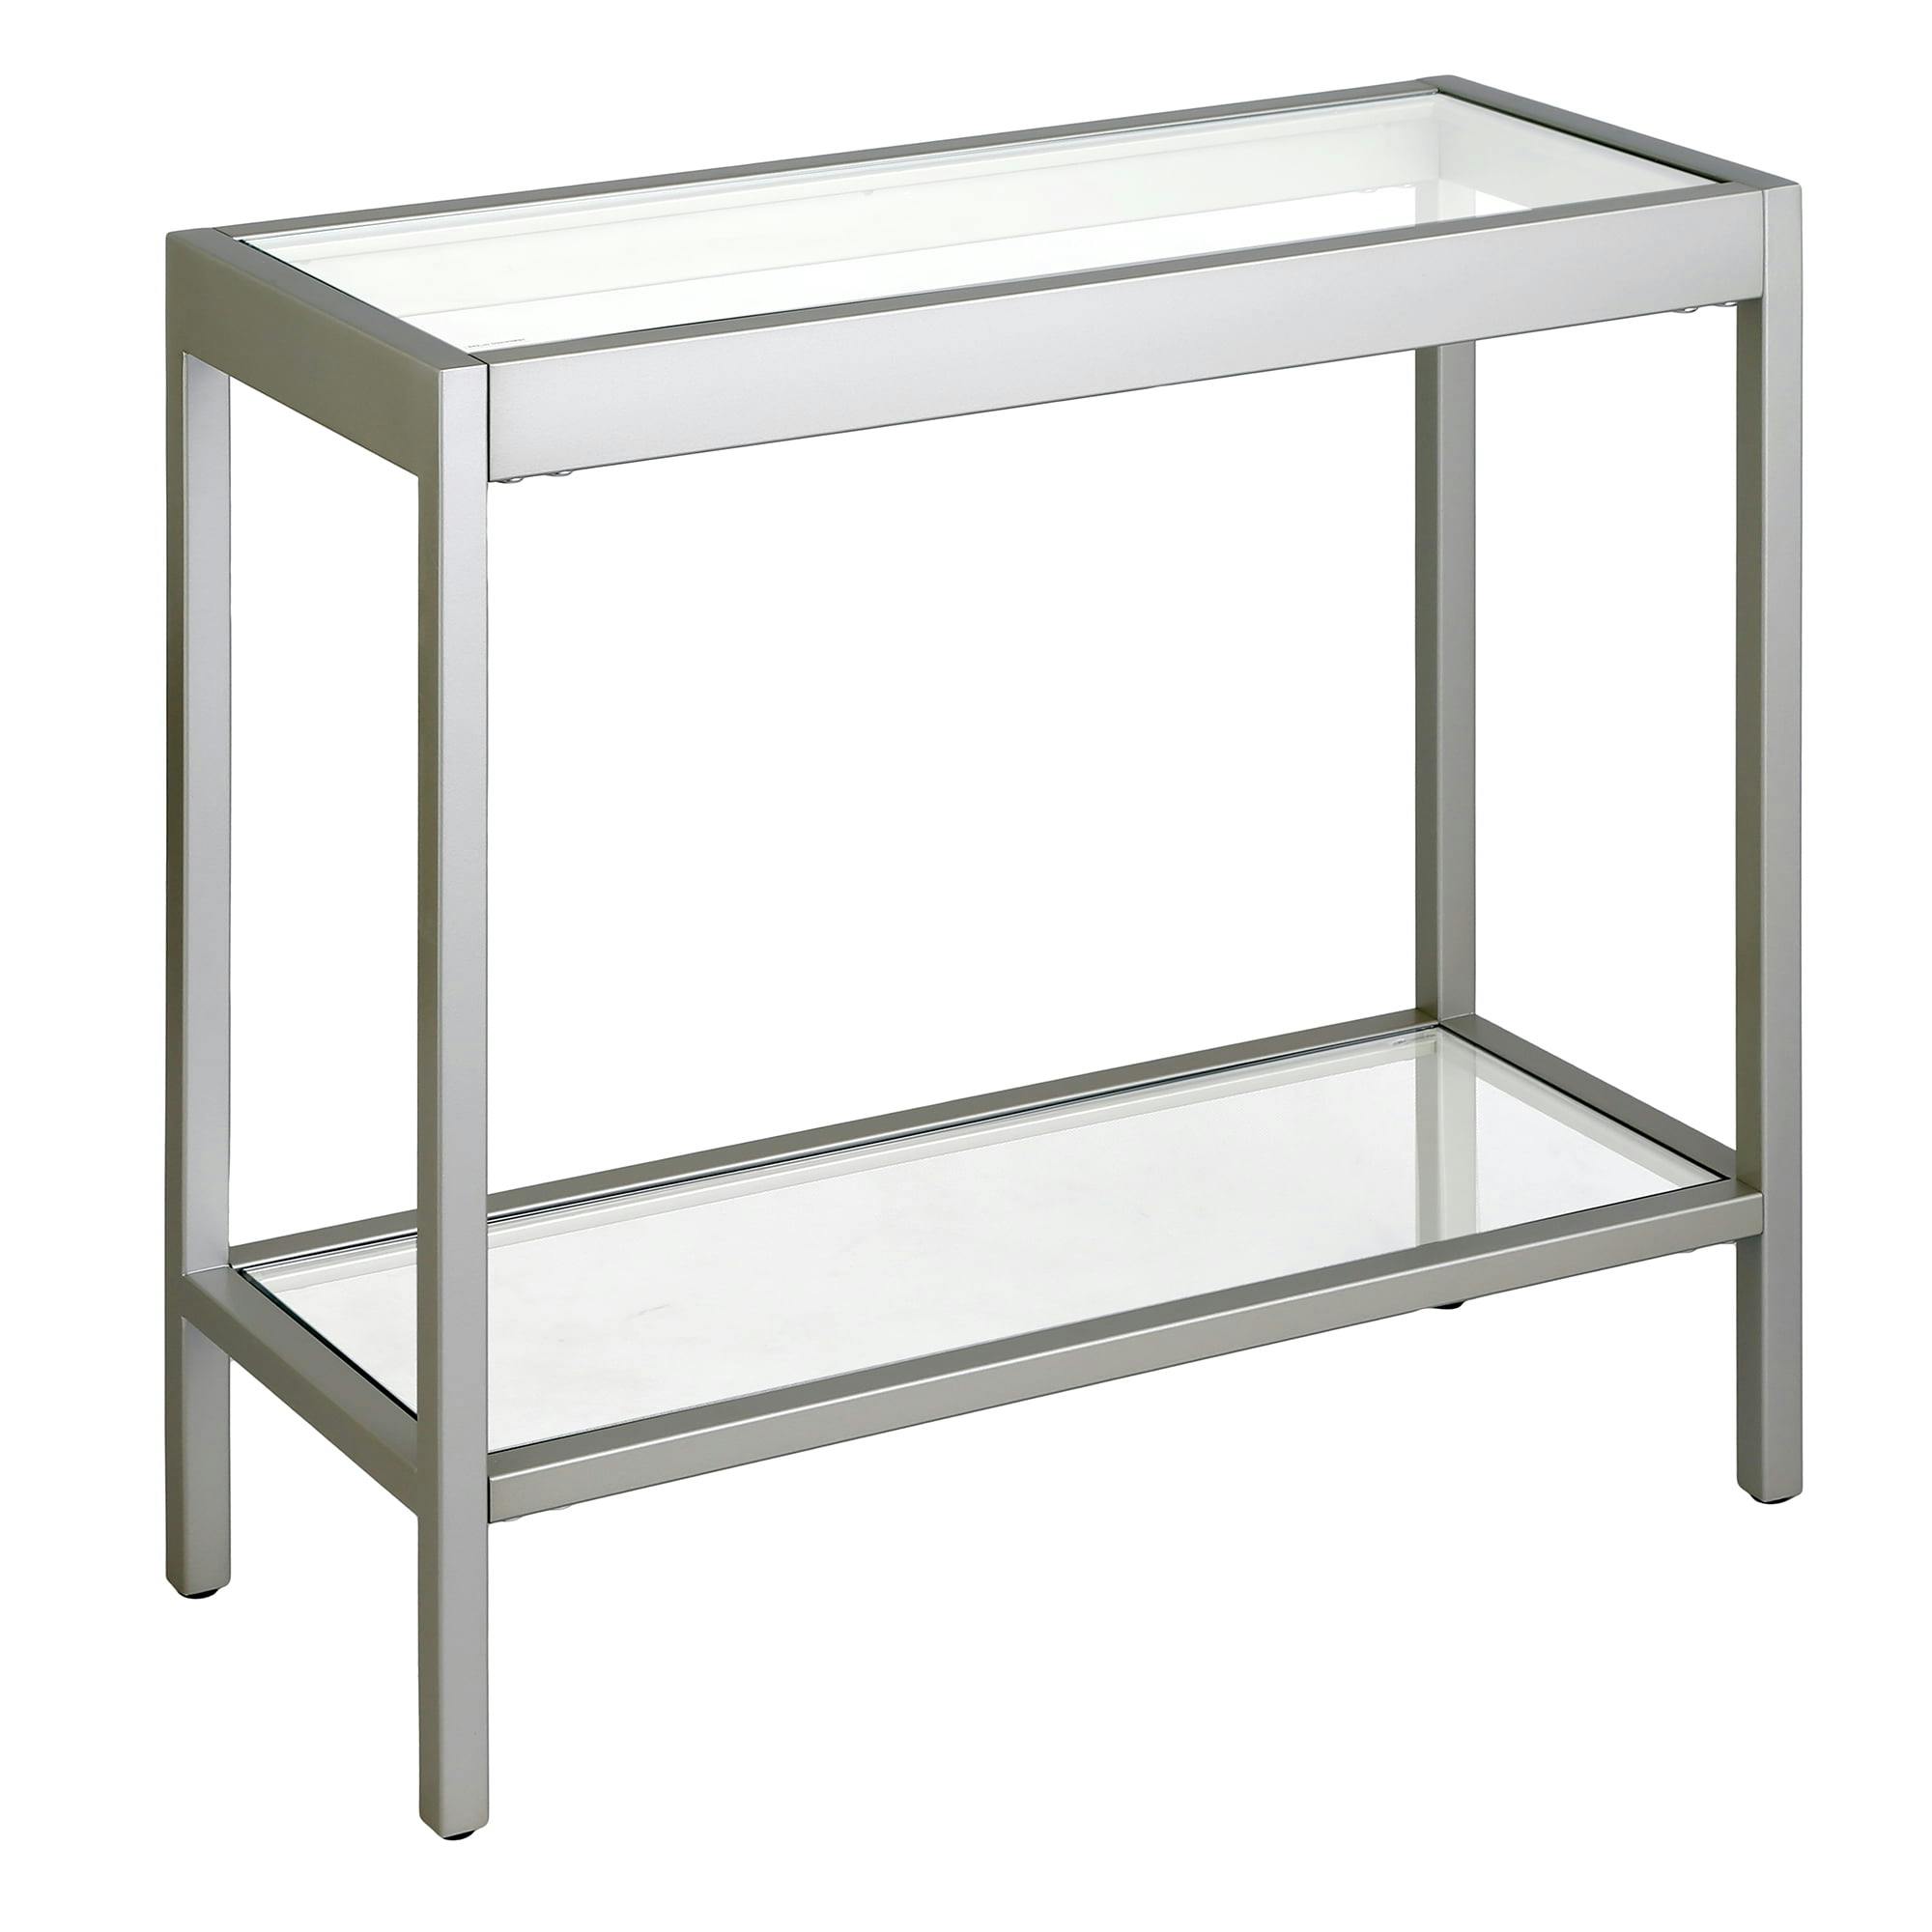 Alexis Satin Nickel Contemporary Glass Metal Side Table